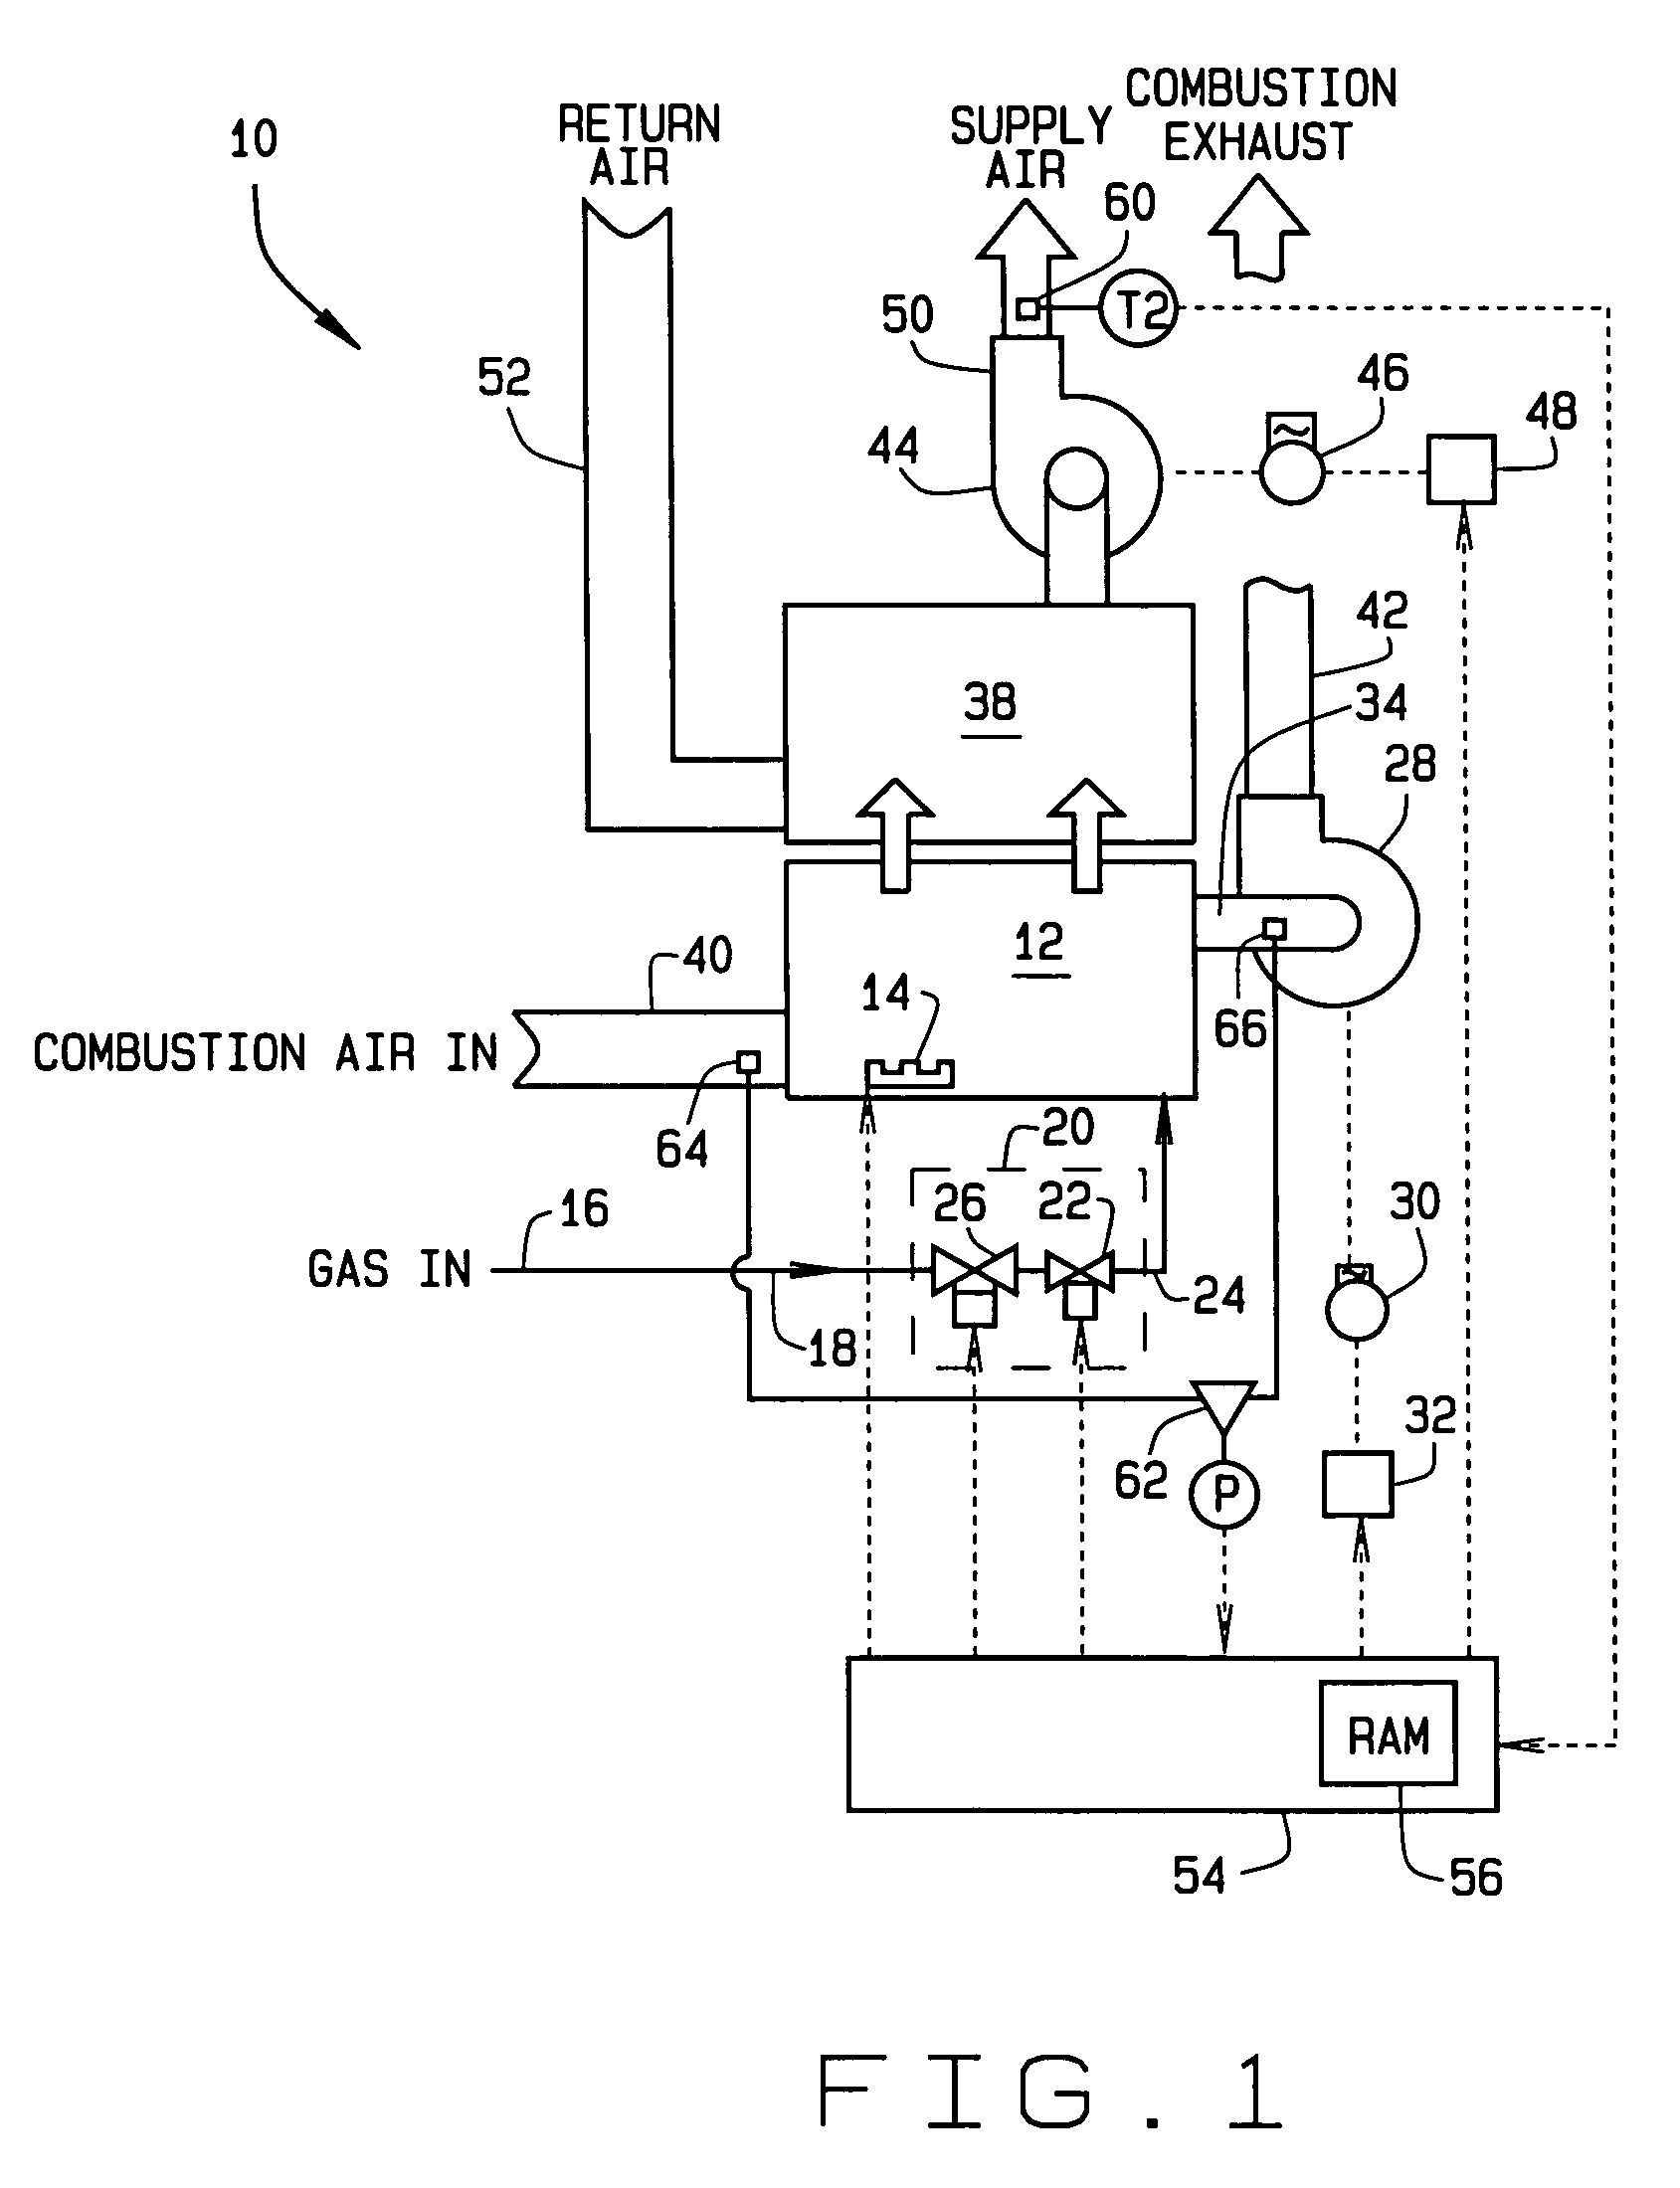 Apparatus and methods for variable furnace control